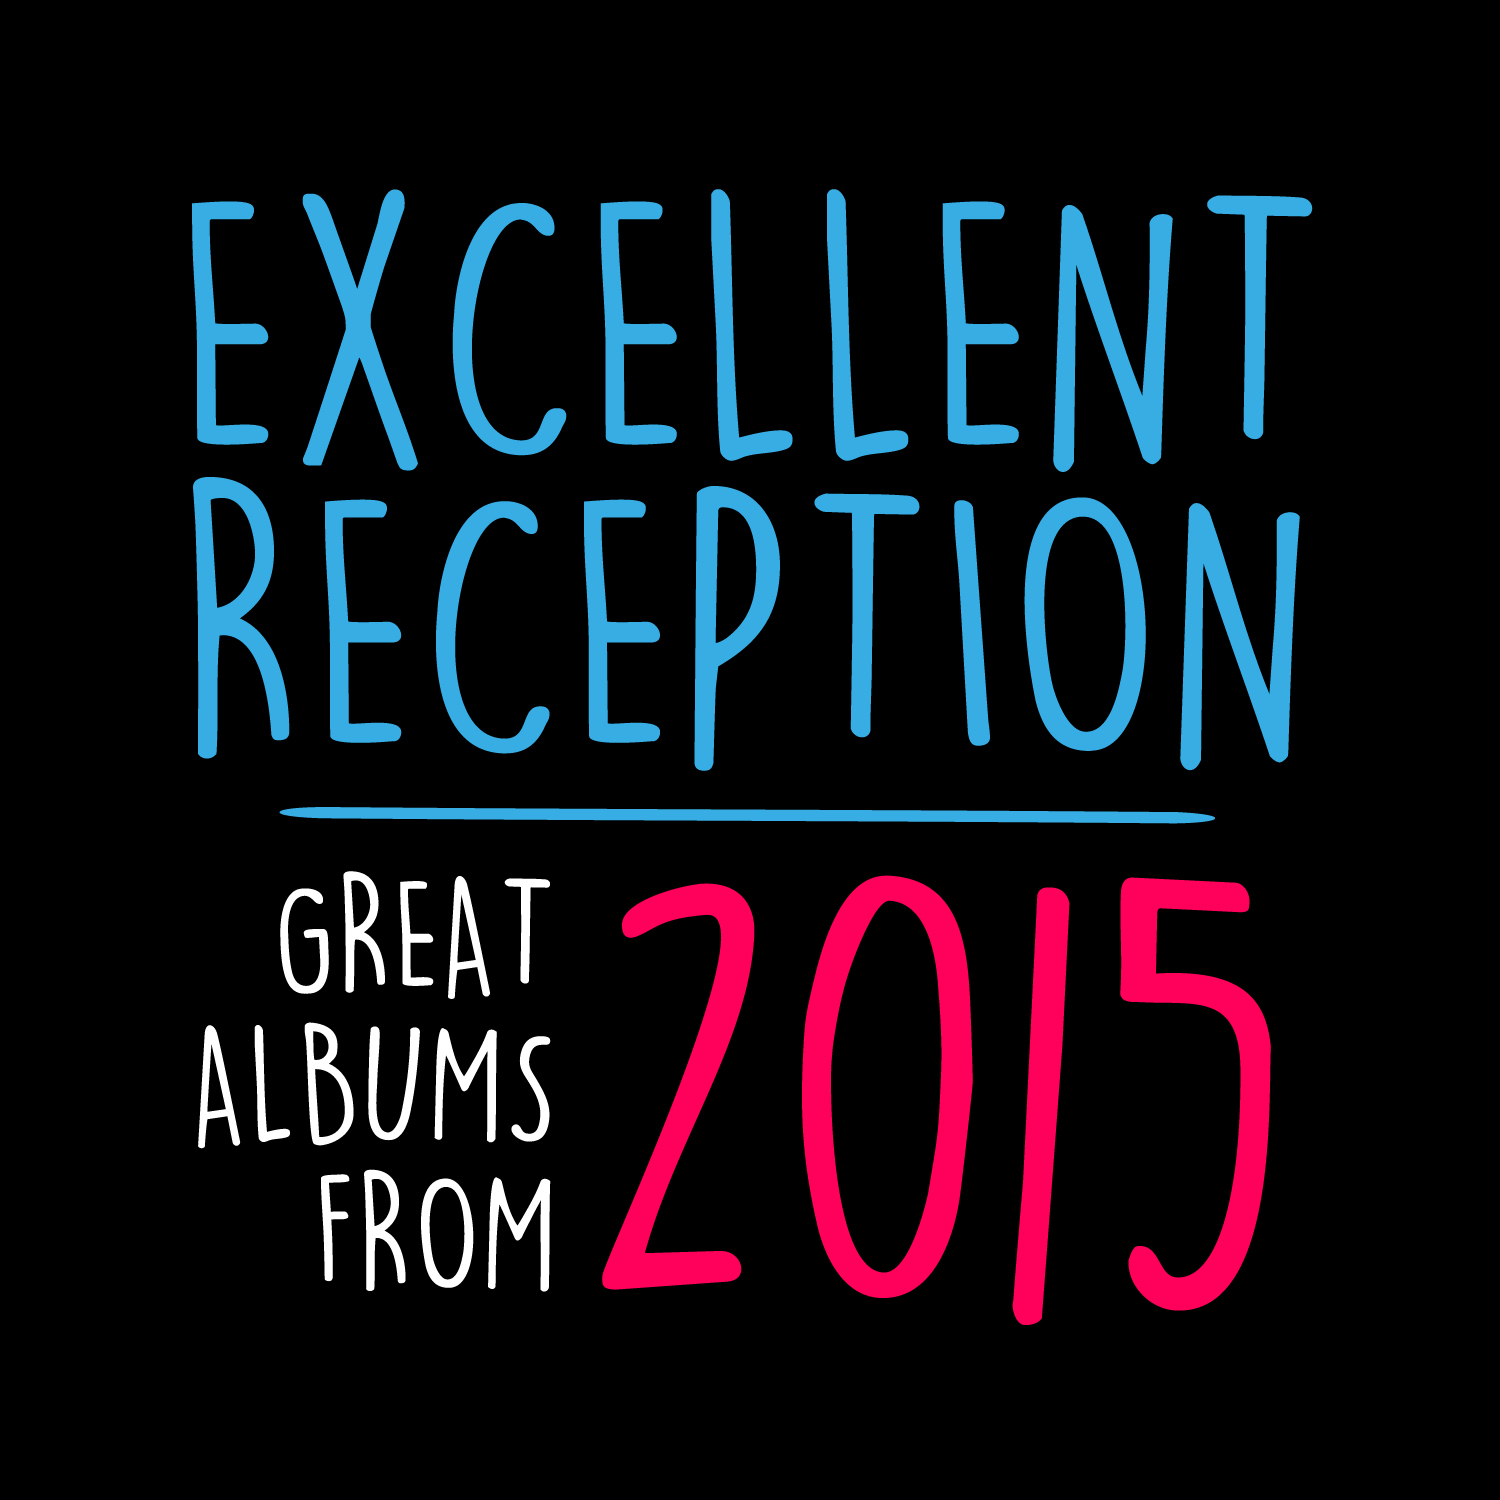 Excellent Reception with lil'dave | Episode 3 : Great Albums of 2015